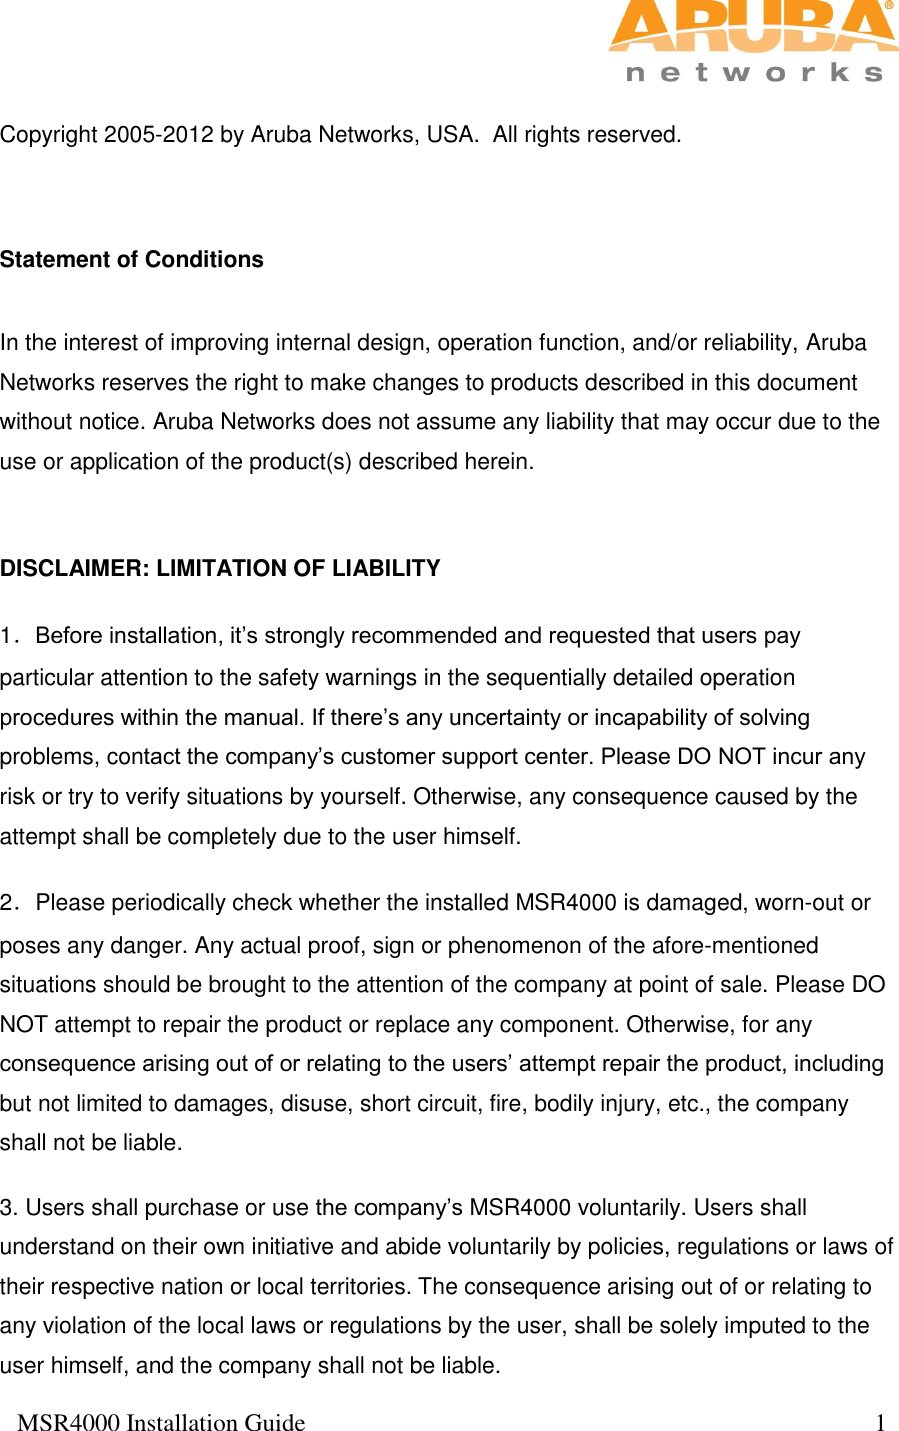  MSR4000 Installation Guide                                                                                           1   Copyright 2005-2012 by Aruba Networks, USA.  All rights reserved.   Statement of Conditions  In the interest of improving internal design, operation function, and/or reliability, Aruba Networks reserves the right to make changes to products described in this document without notice. Aruba Networks does not assume any liability that may occur due to the use or application of the product(s) described herein.  DISCLAIMER: LIMITATION OF LIABILITY 1．Before installation, it’s strongly recommended and requested that users pay particular attention to the safety warnings in the sequentially detailed operation procedures within the manual. If there’s any uncertainty or incapability of solving problems, contact the company’s customer support center. Please DO NOT incur any risk or try to verify situations by yourself. Otherwise, any consequence caused by the attempt shall be completely due to the user himself. 2．Please periodically check whether the installed MSR4000 is damaged, worn-out or poses any danger. Any actual proof, sign or phenomenon of the afore-mentioned situations should be brought to the attention of the company at point of sale. Please DO NOT attempt to repair the product or replace any component. Otherwise, for any consequence arising out of or relating to the users’ attempt repair the product, including but not limited to damages, disuse, short circuit, fire, bodily injury, etc., the company shall not be liable. 3. Users shall purchase or use the company’s MSR4000 voluntarily. Users shall understand on their own initiative and abide voluntarily by policies, regulations or laws of their respective nation or local territories. The consequence arising out of or relating to any violation of the local laws or regulations by the user, shall be solely imputed to the user himself, and the company shall not be liable. 